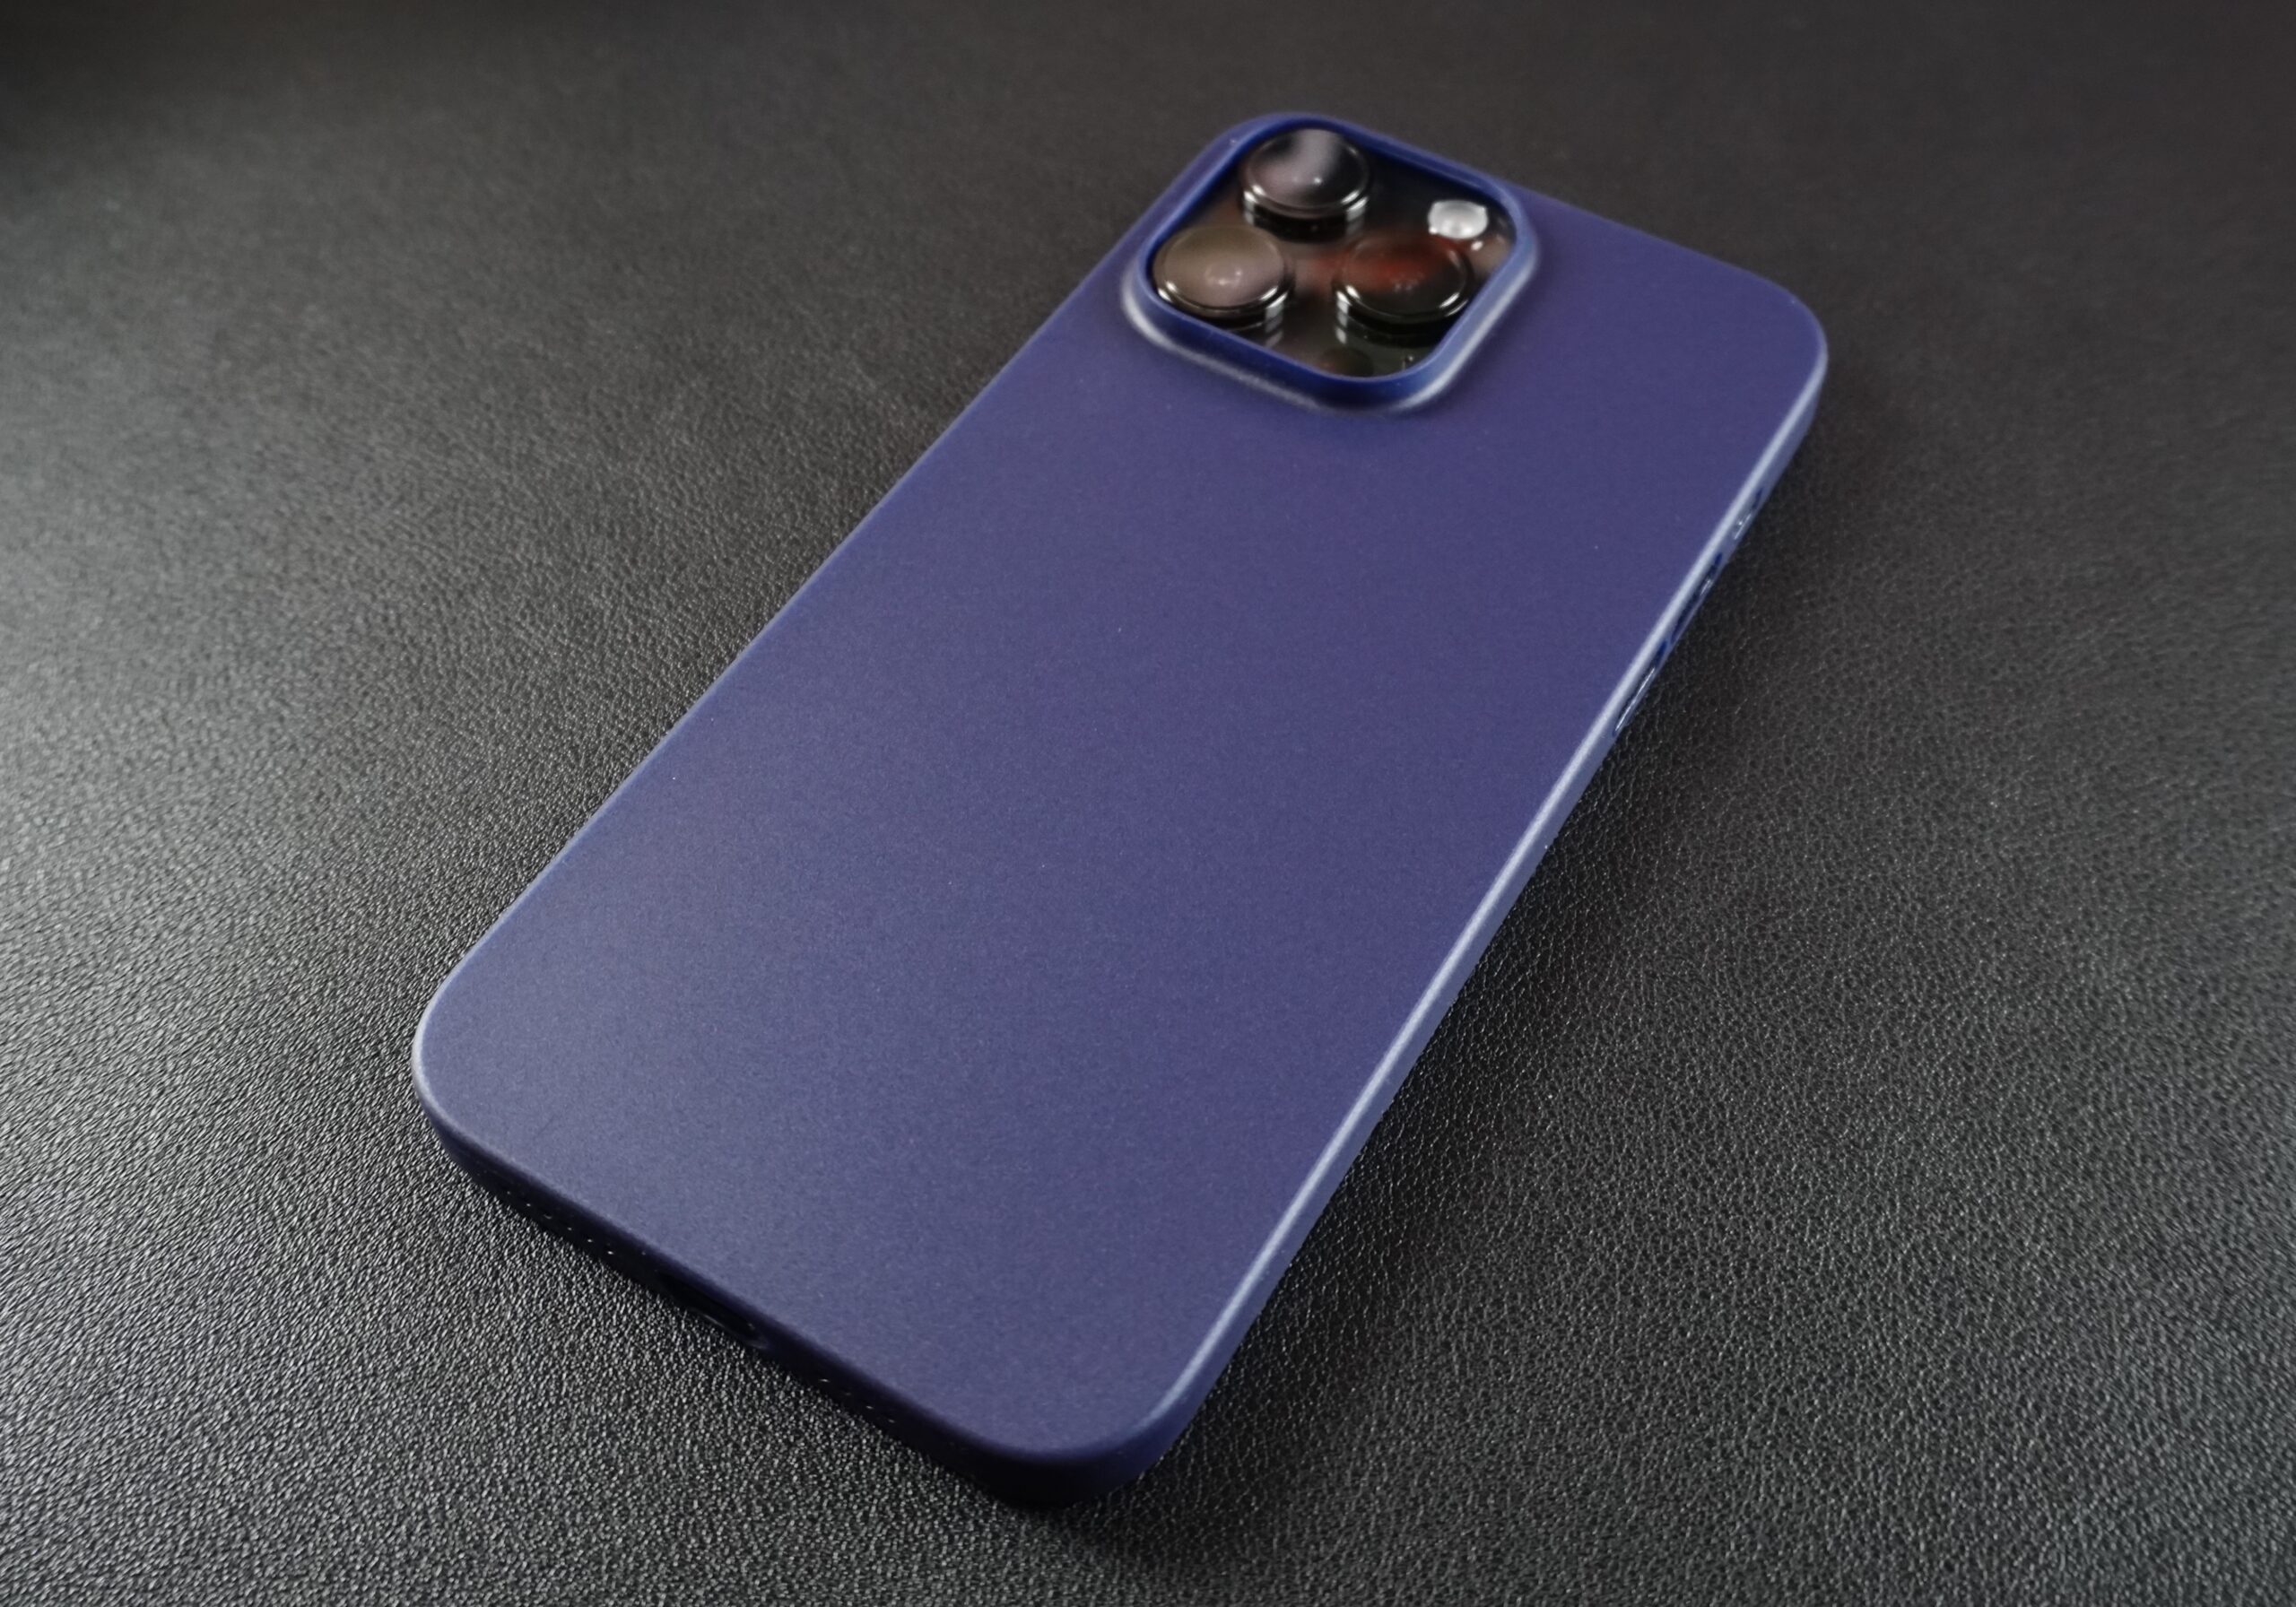 Totallee Thin Cases For iPhone 14 Pro Max - Review - iOS Hacker